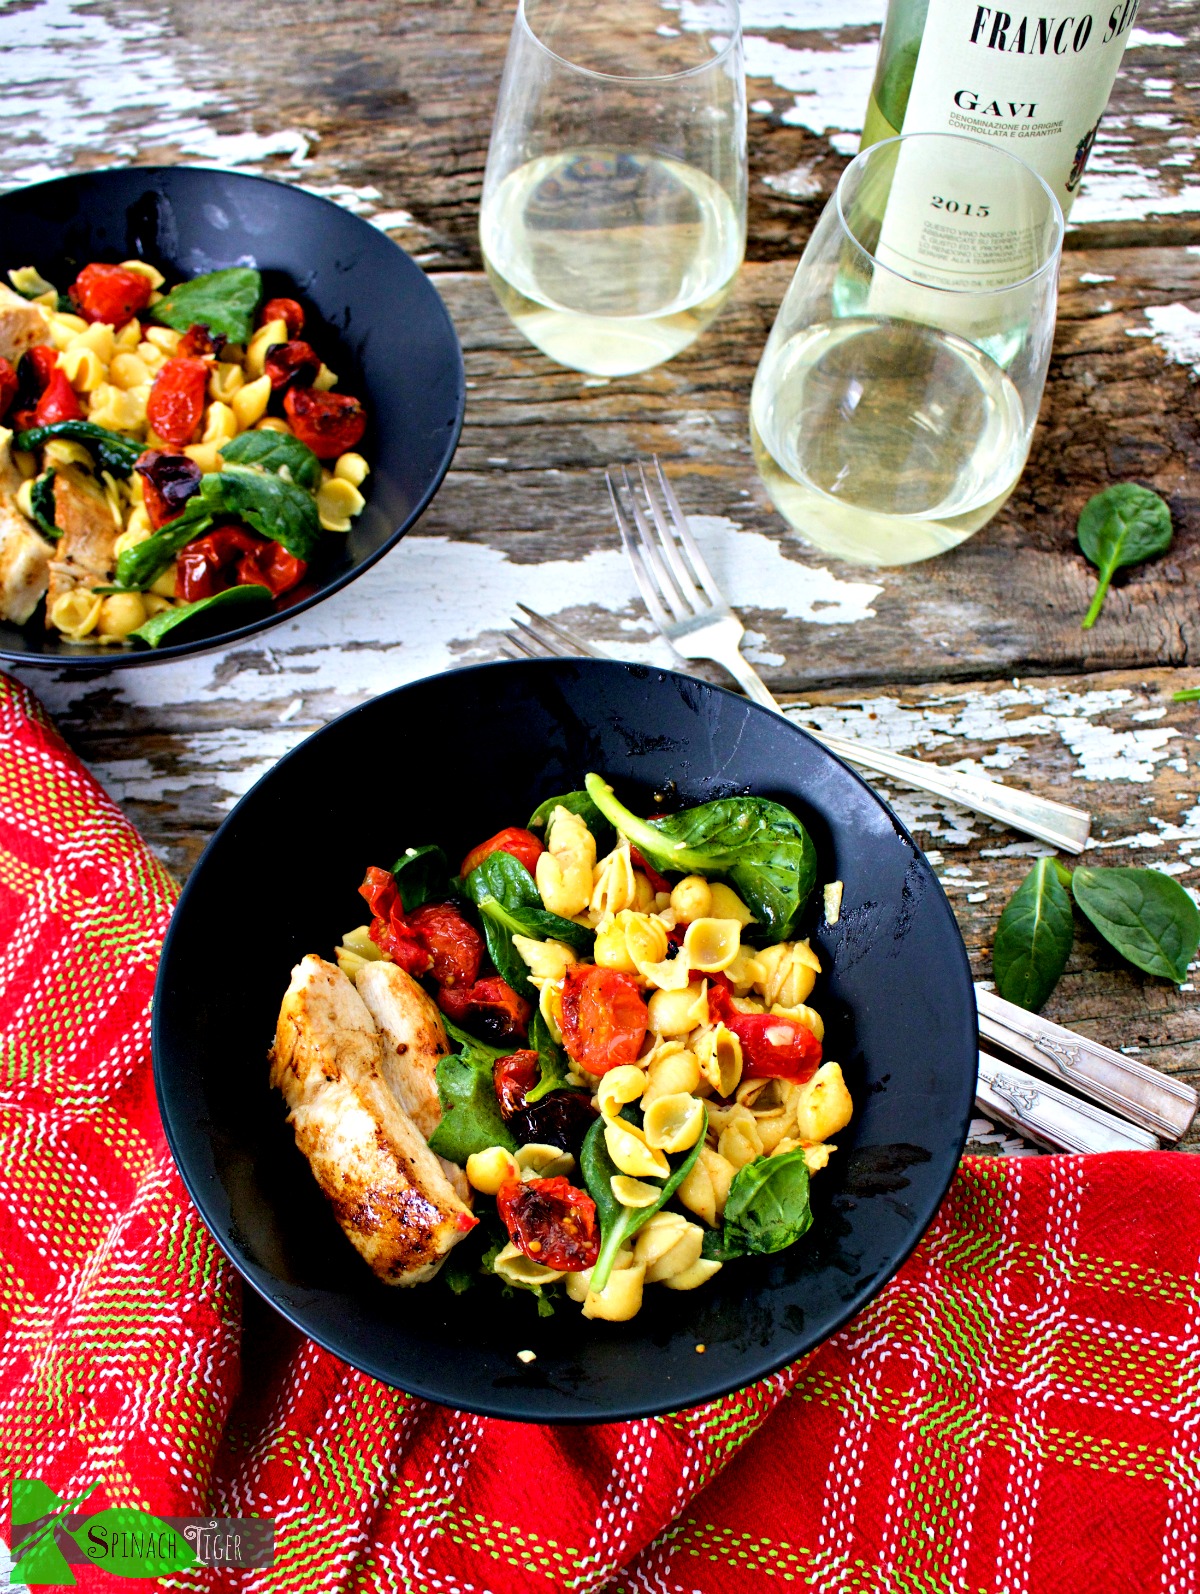 Healthy Chicken Pasta Shells with Roasted Tomatoes from Spinach Tiger